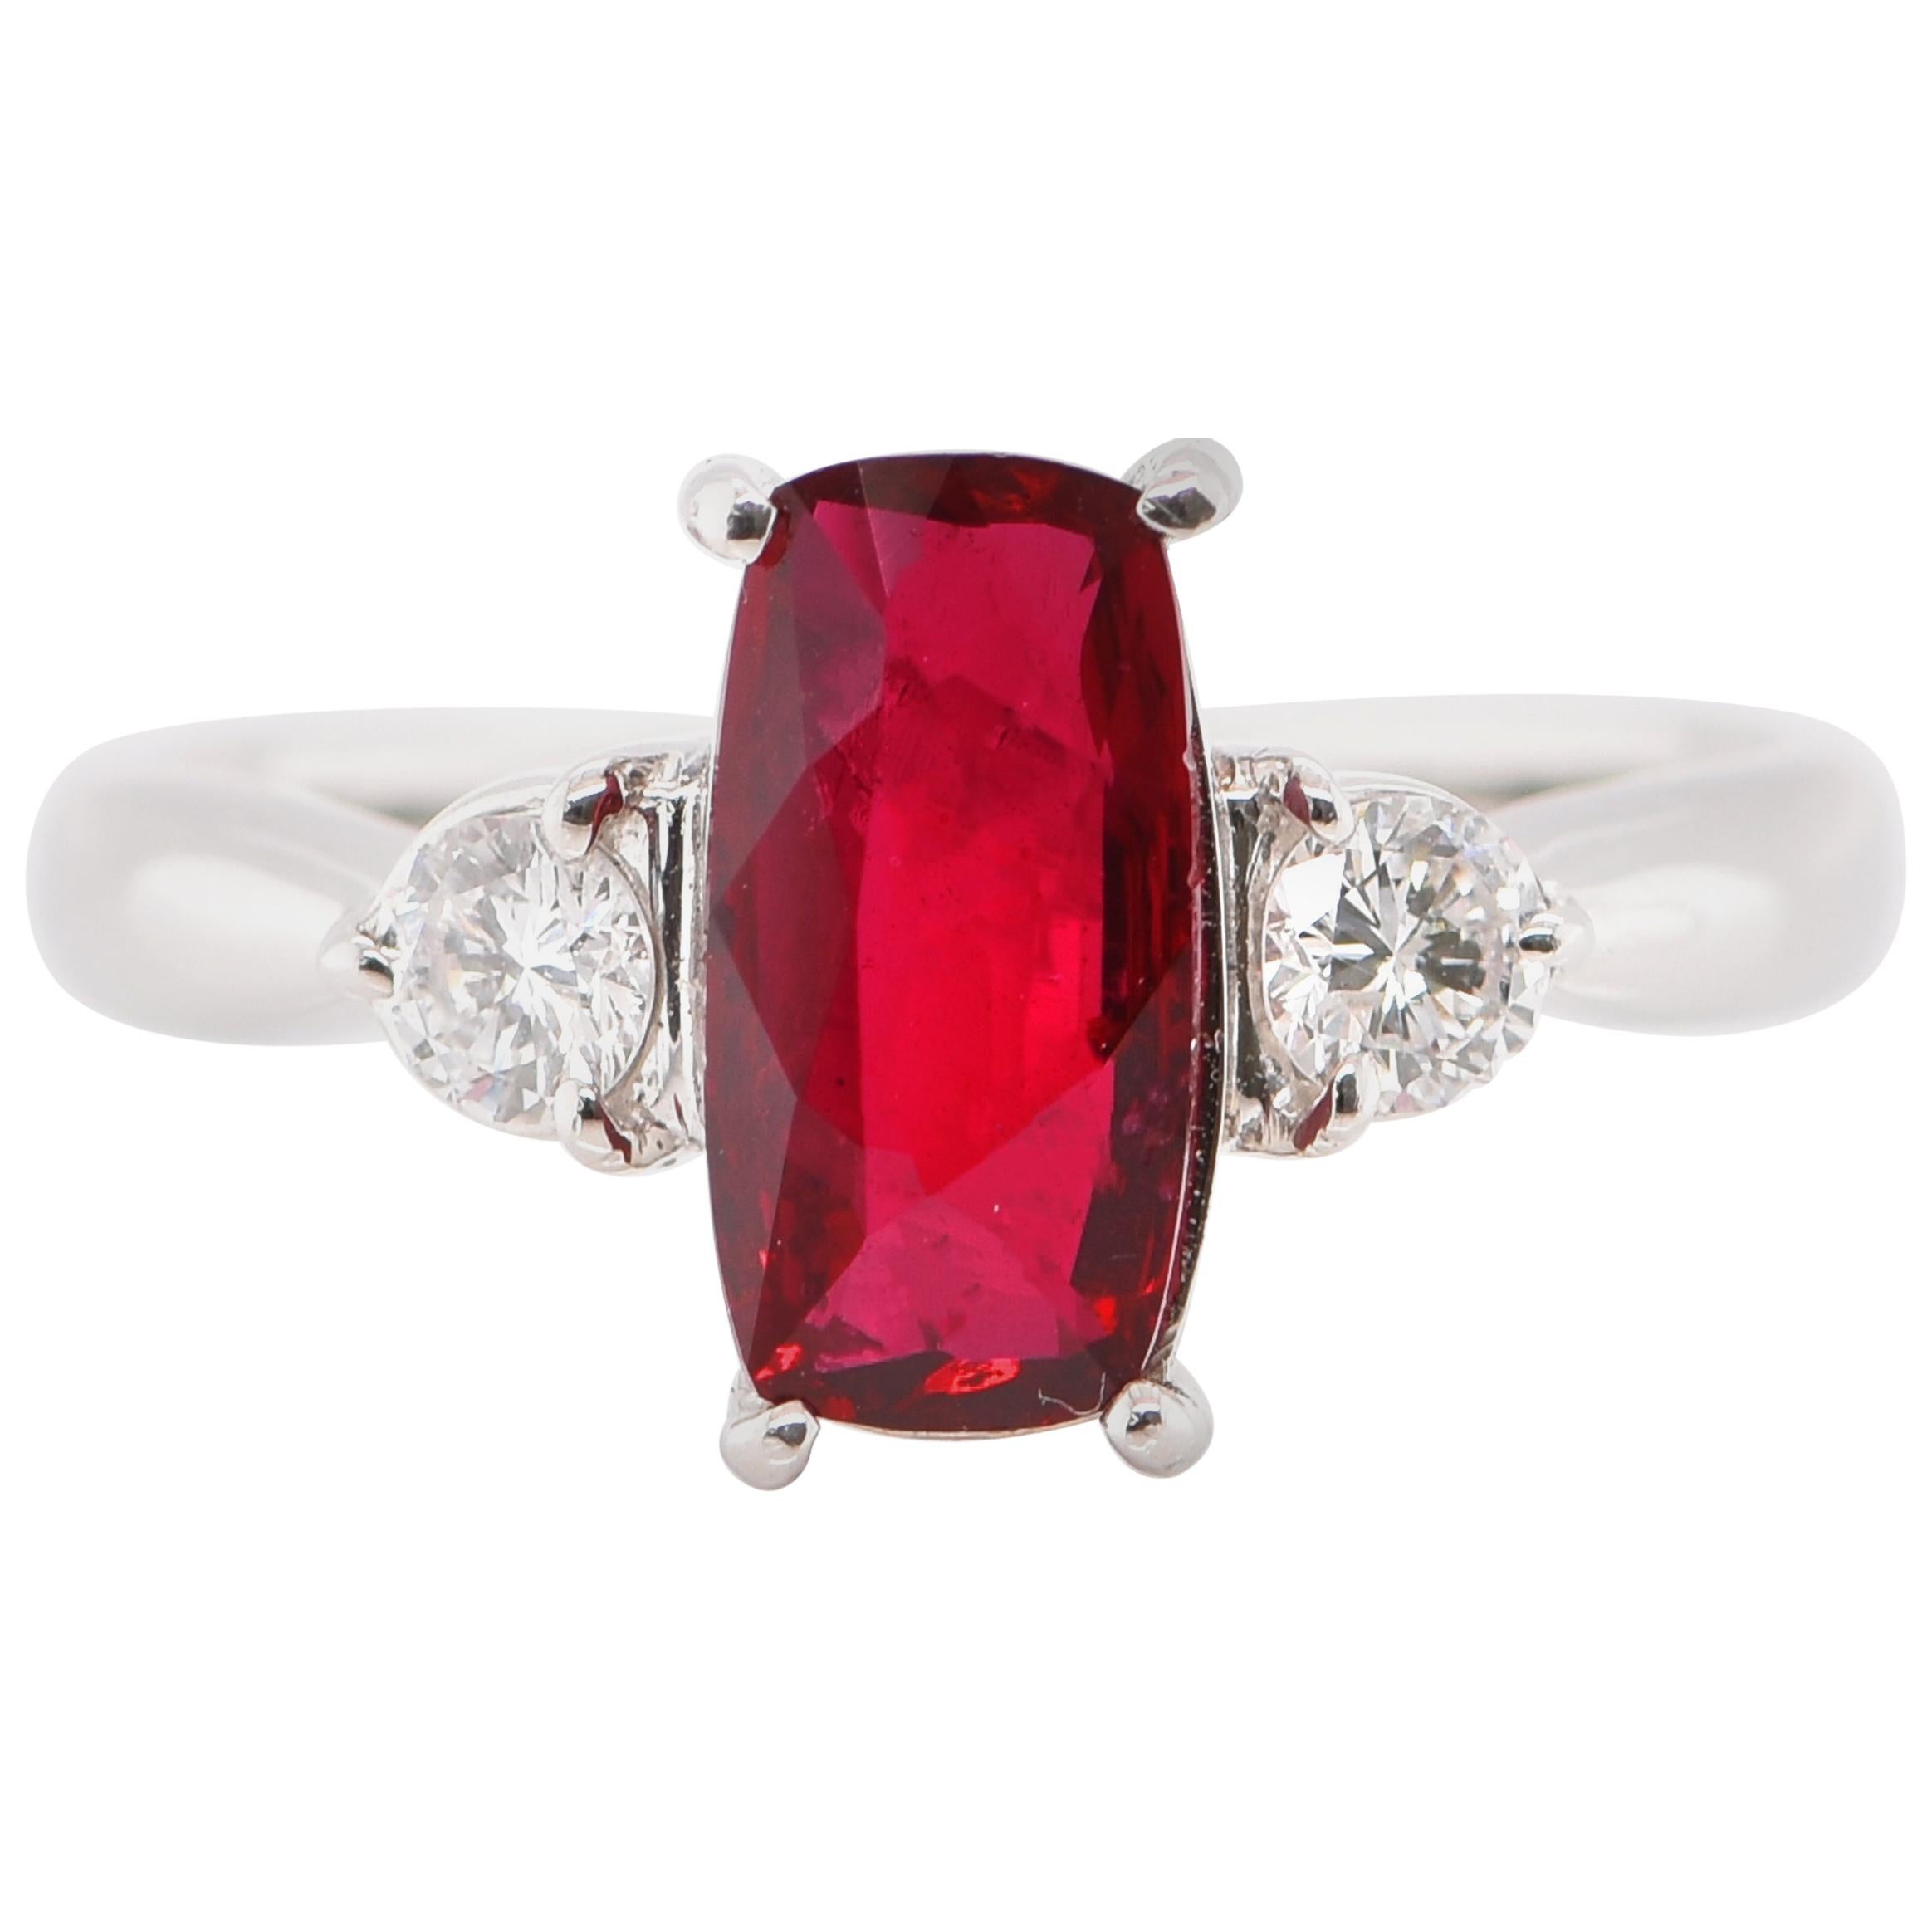 2.019 Carat Untreated, Mozambique Ruby and Diamond Ring Set in Platinum